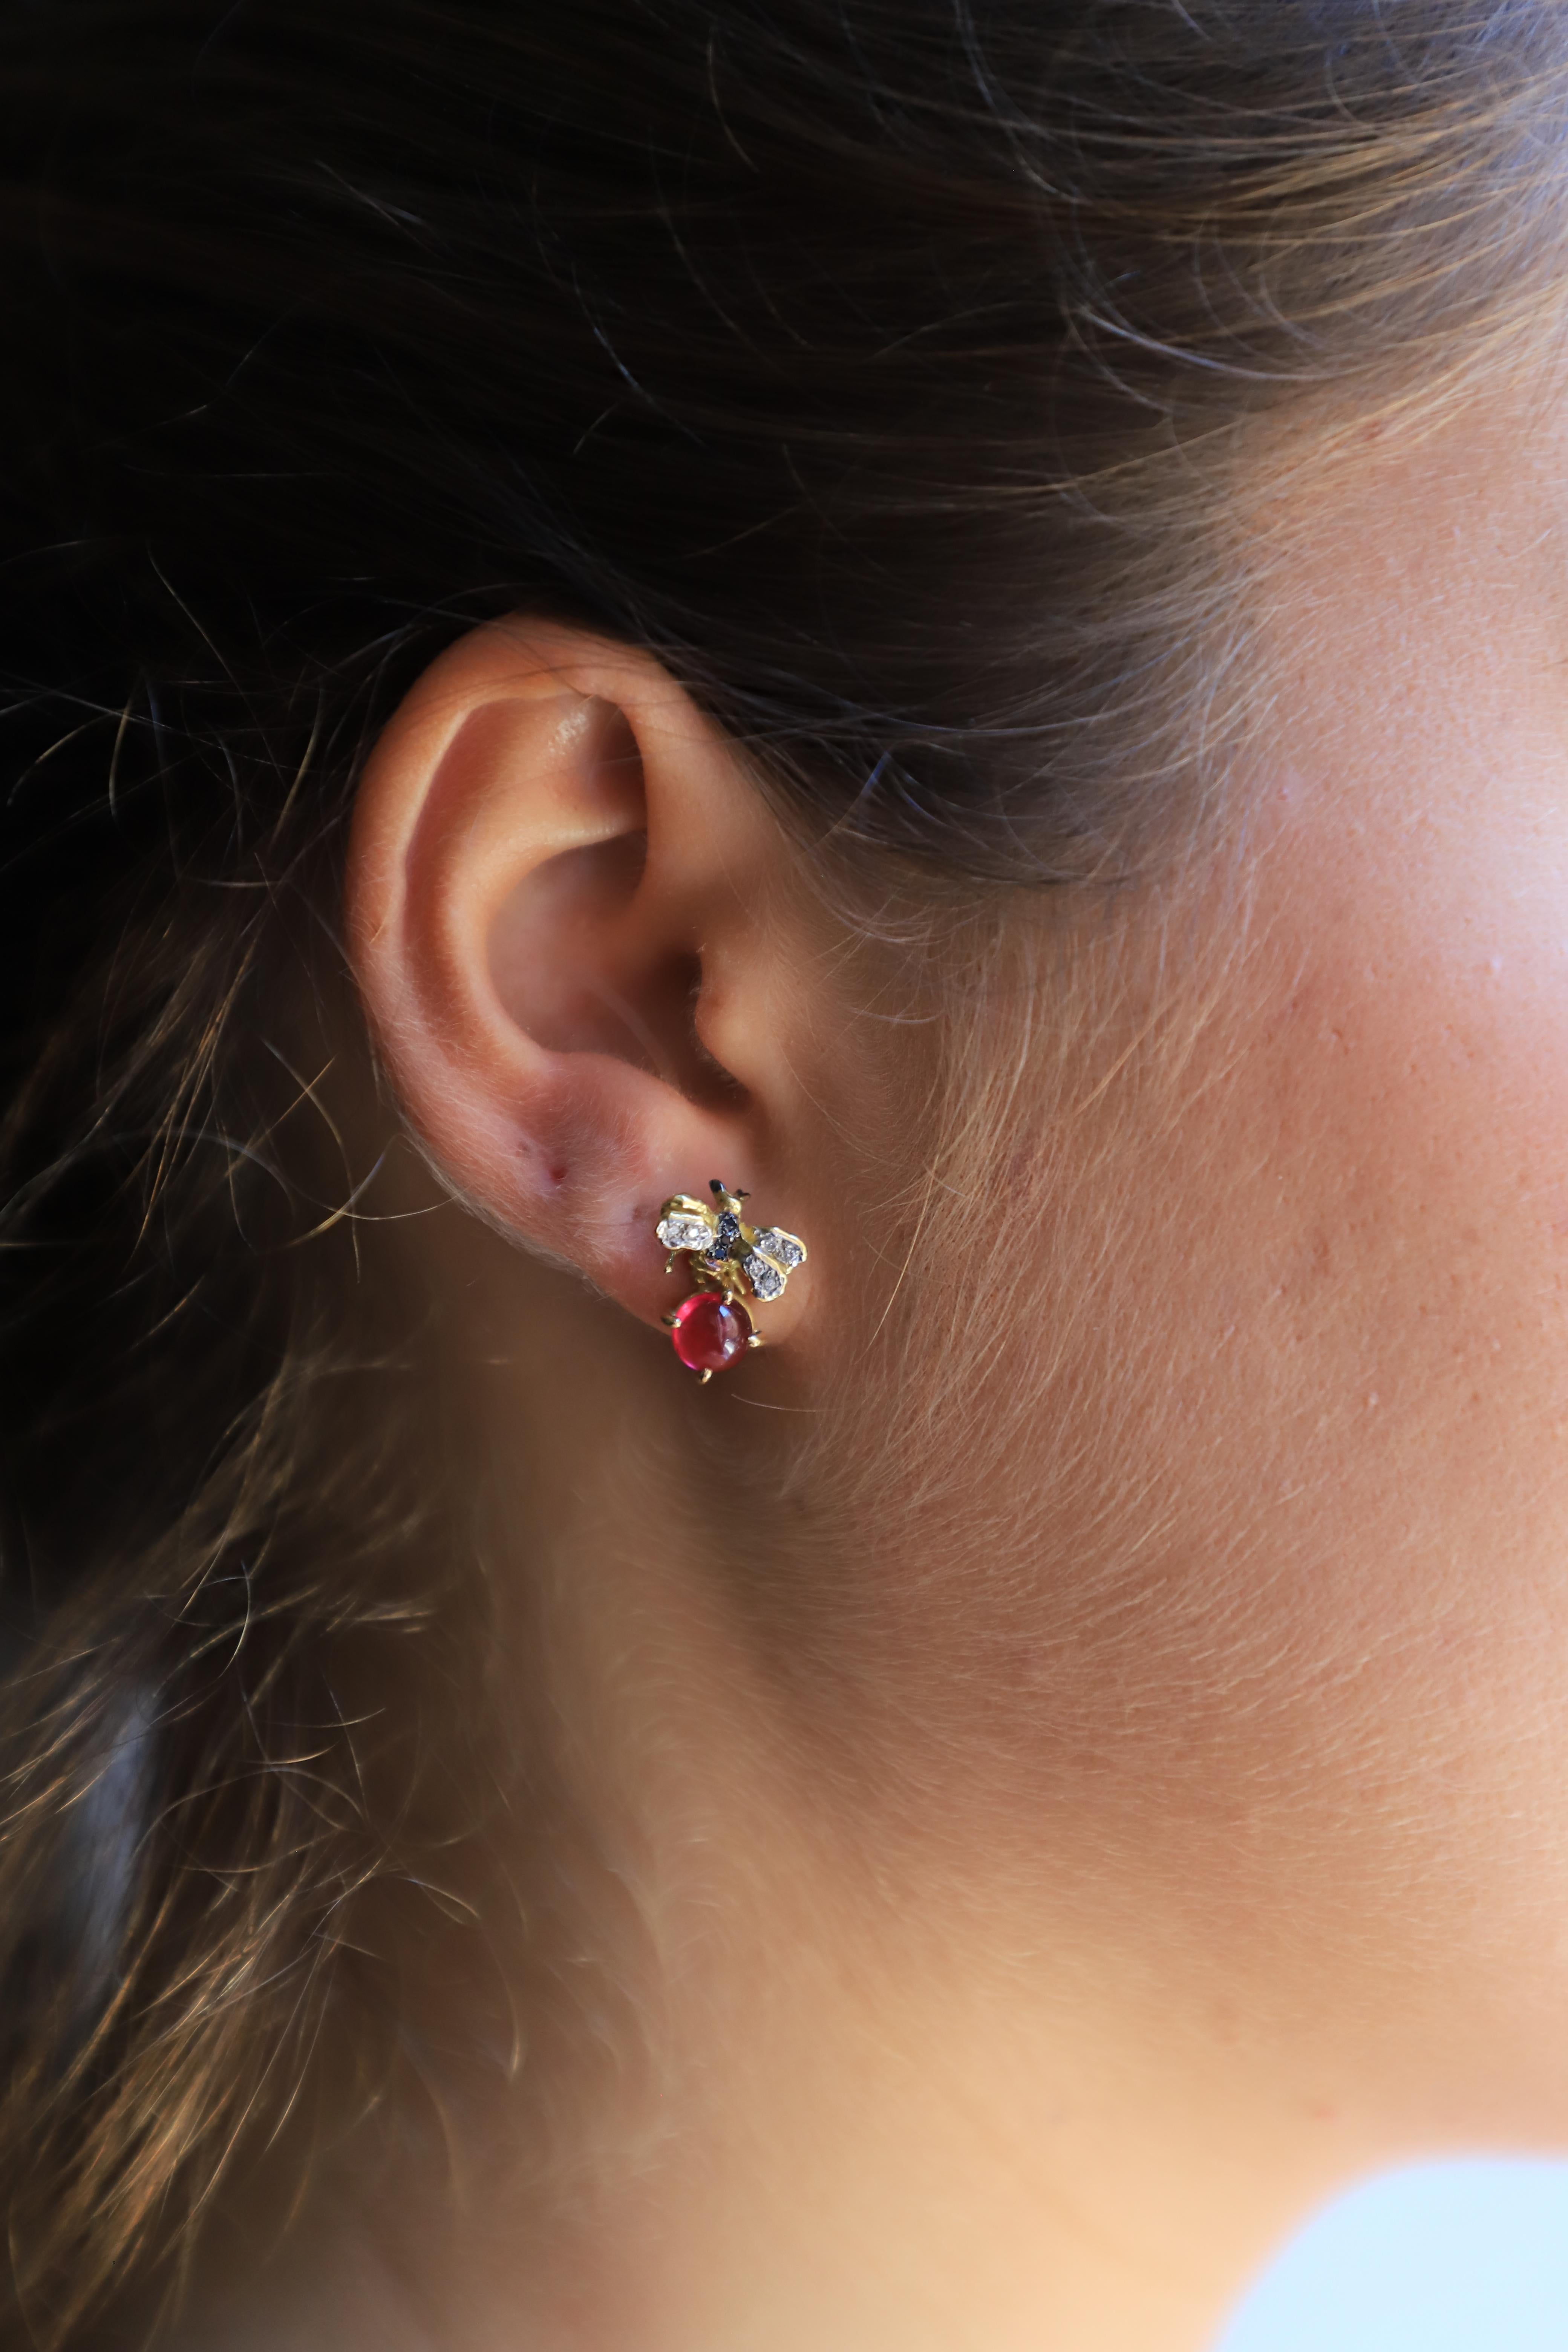 Indulge in the allure of Rossella Ugolini's exquisite handcrafted earrings. These captivating 18K yellow gold stud earrings feature a stunning 3.50 karat rose-pink tourmaline, accented with delicate white and black diamonds. The beguiling rose-pink